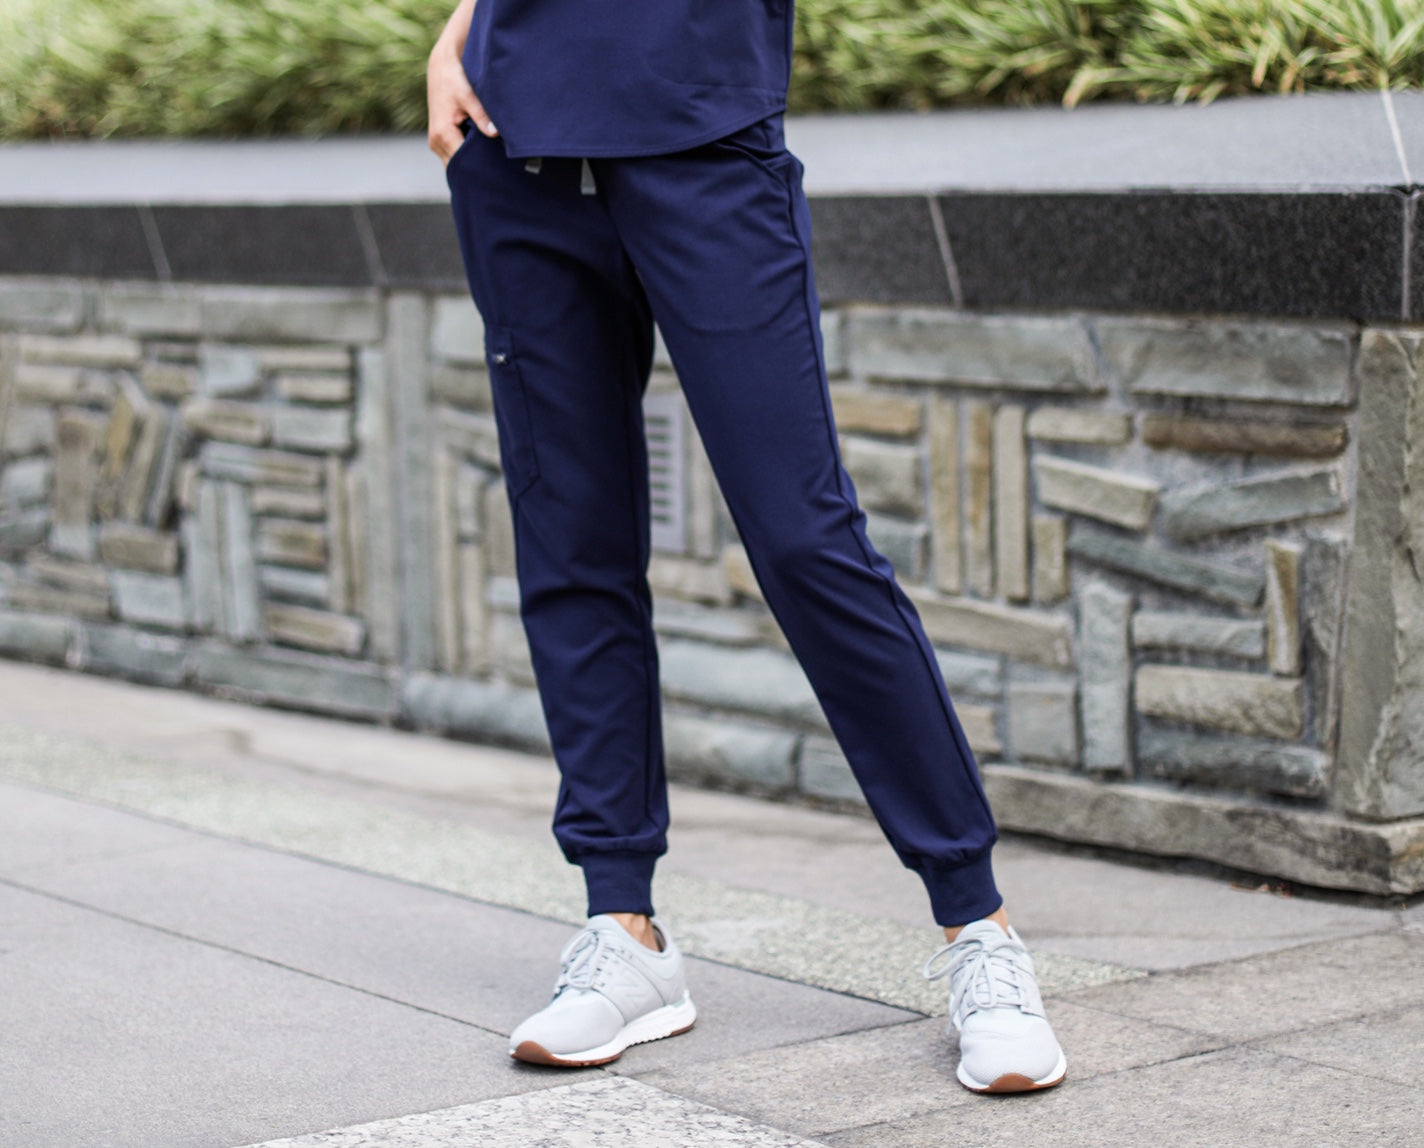 FIGS - If you haven't heard already — the Zamora jogger is BACK